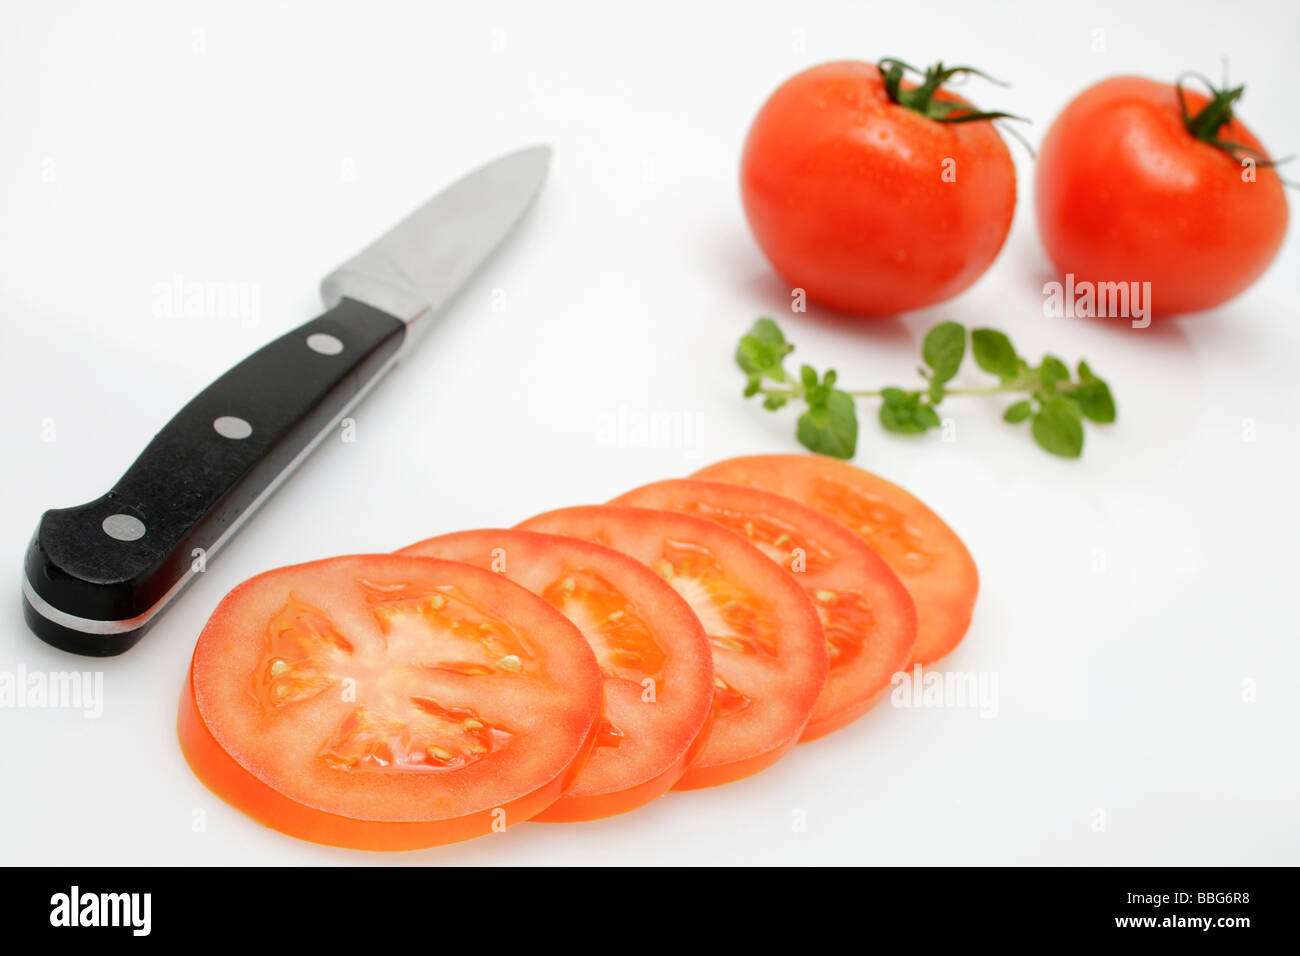 Sliced tomato and whole tomatoes with knife Stock Photo